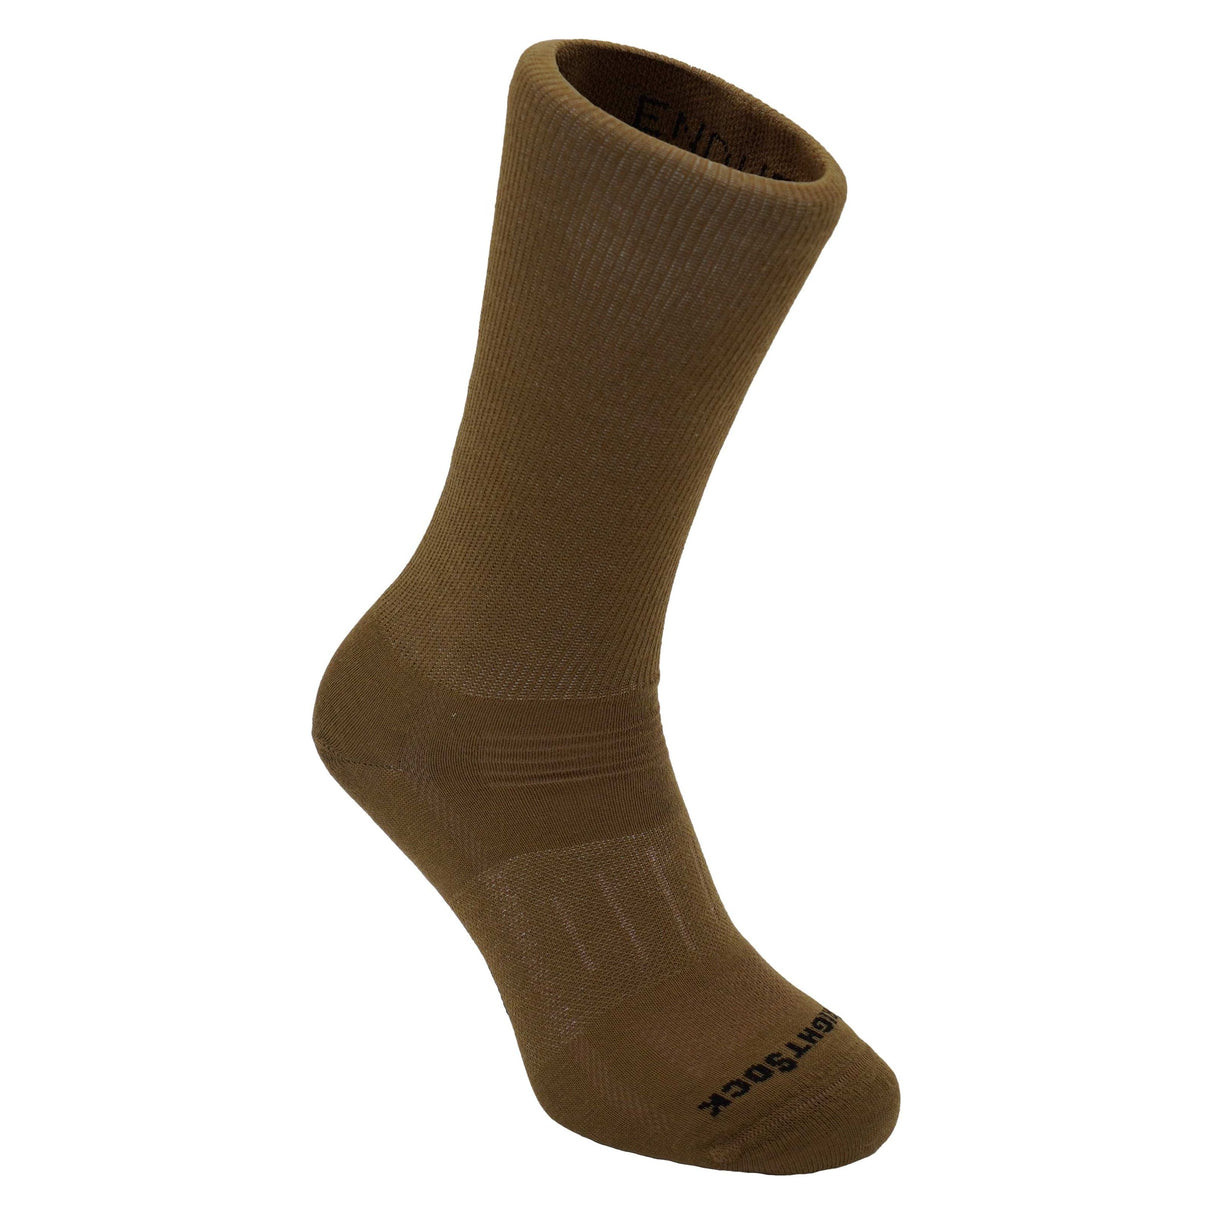 Wrightsock Double-Layer Endurance Crew Socks  -  Small / Coyote Brown